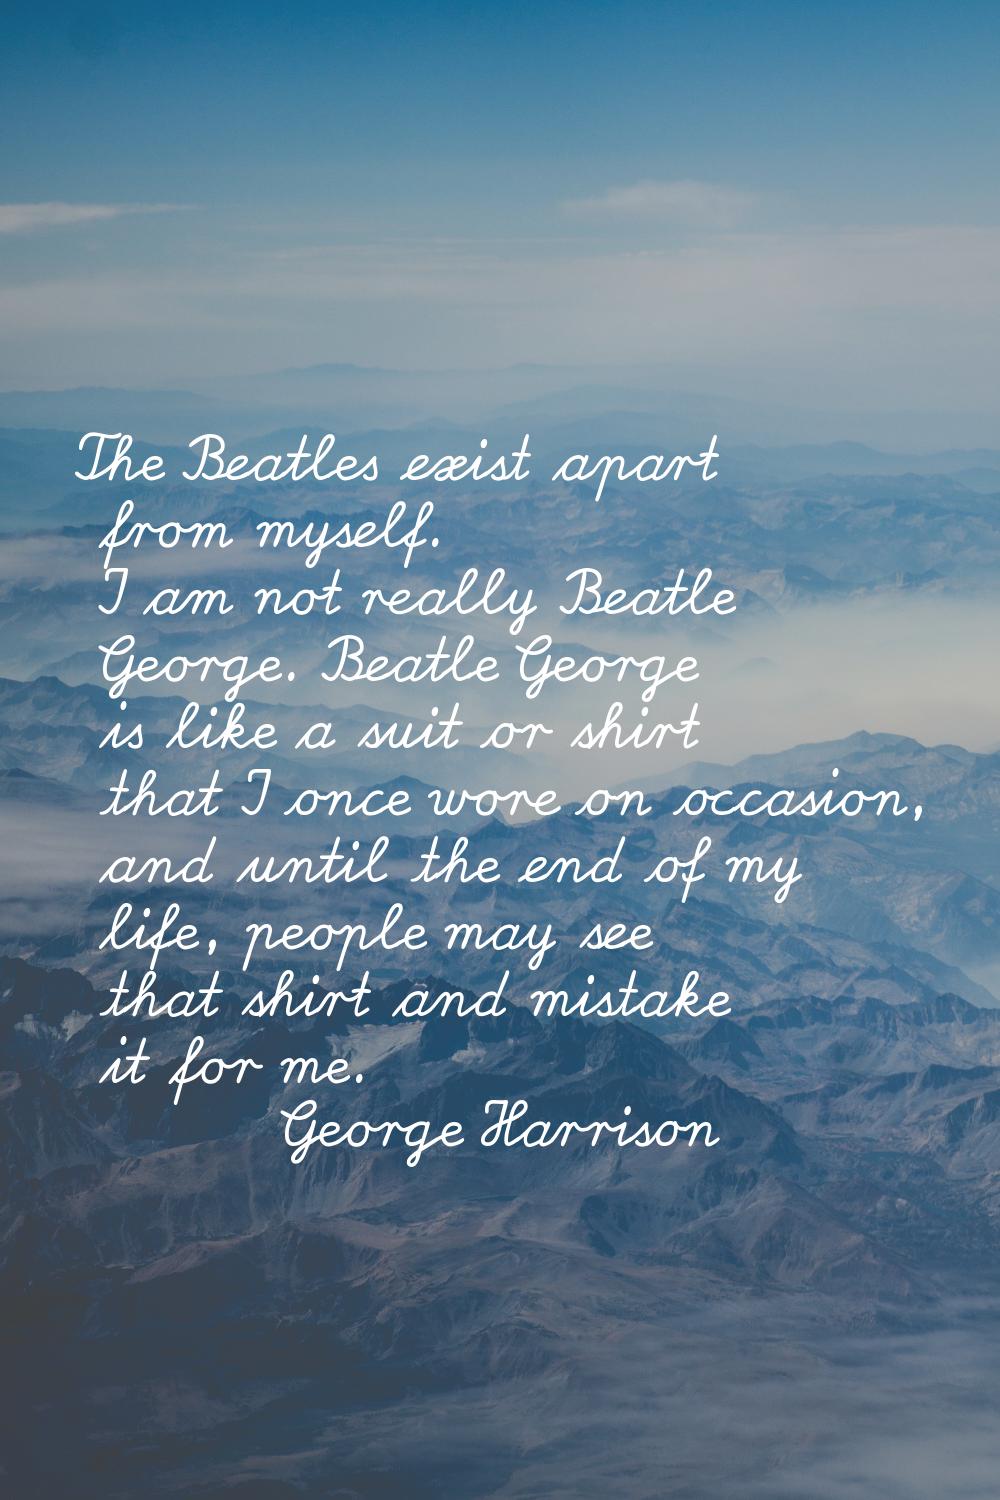 The Beatles exist apart from myself. I am not really Beatle George. Beatle George is like a suit or